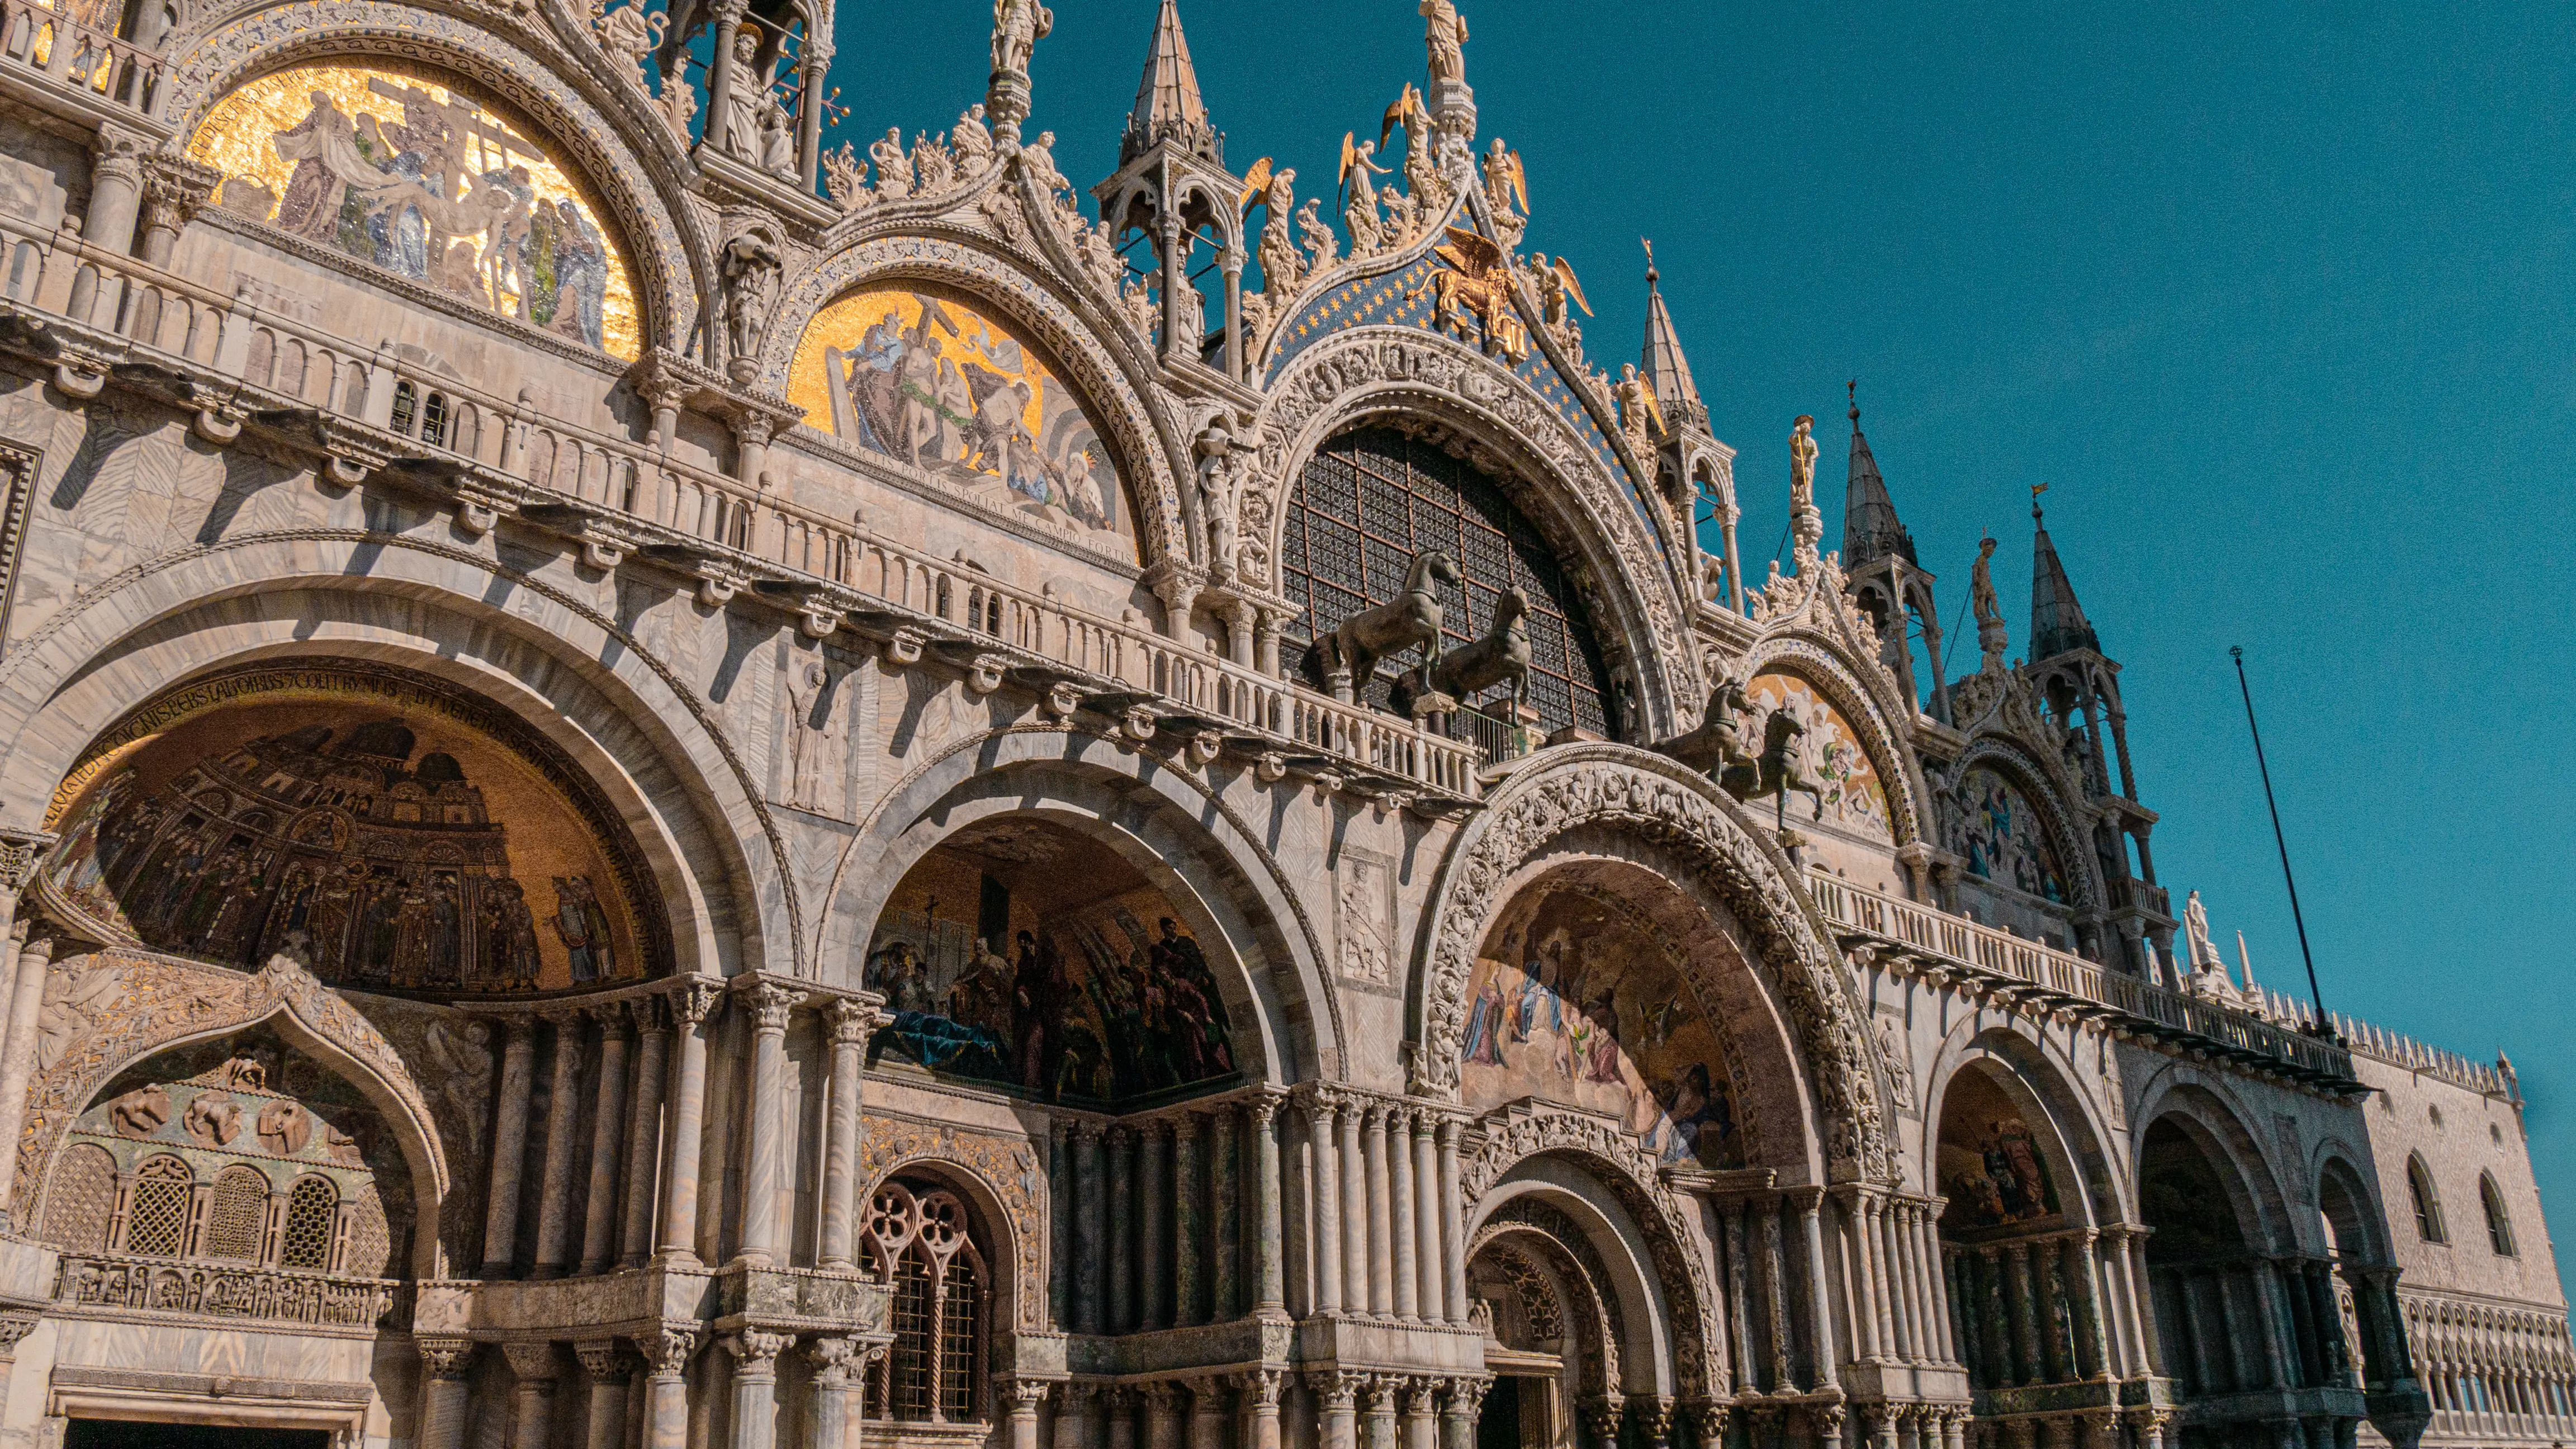 Time for visiting Saint Mark's Basilica in Venice, Italy